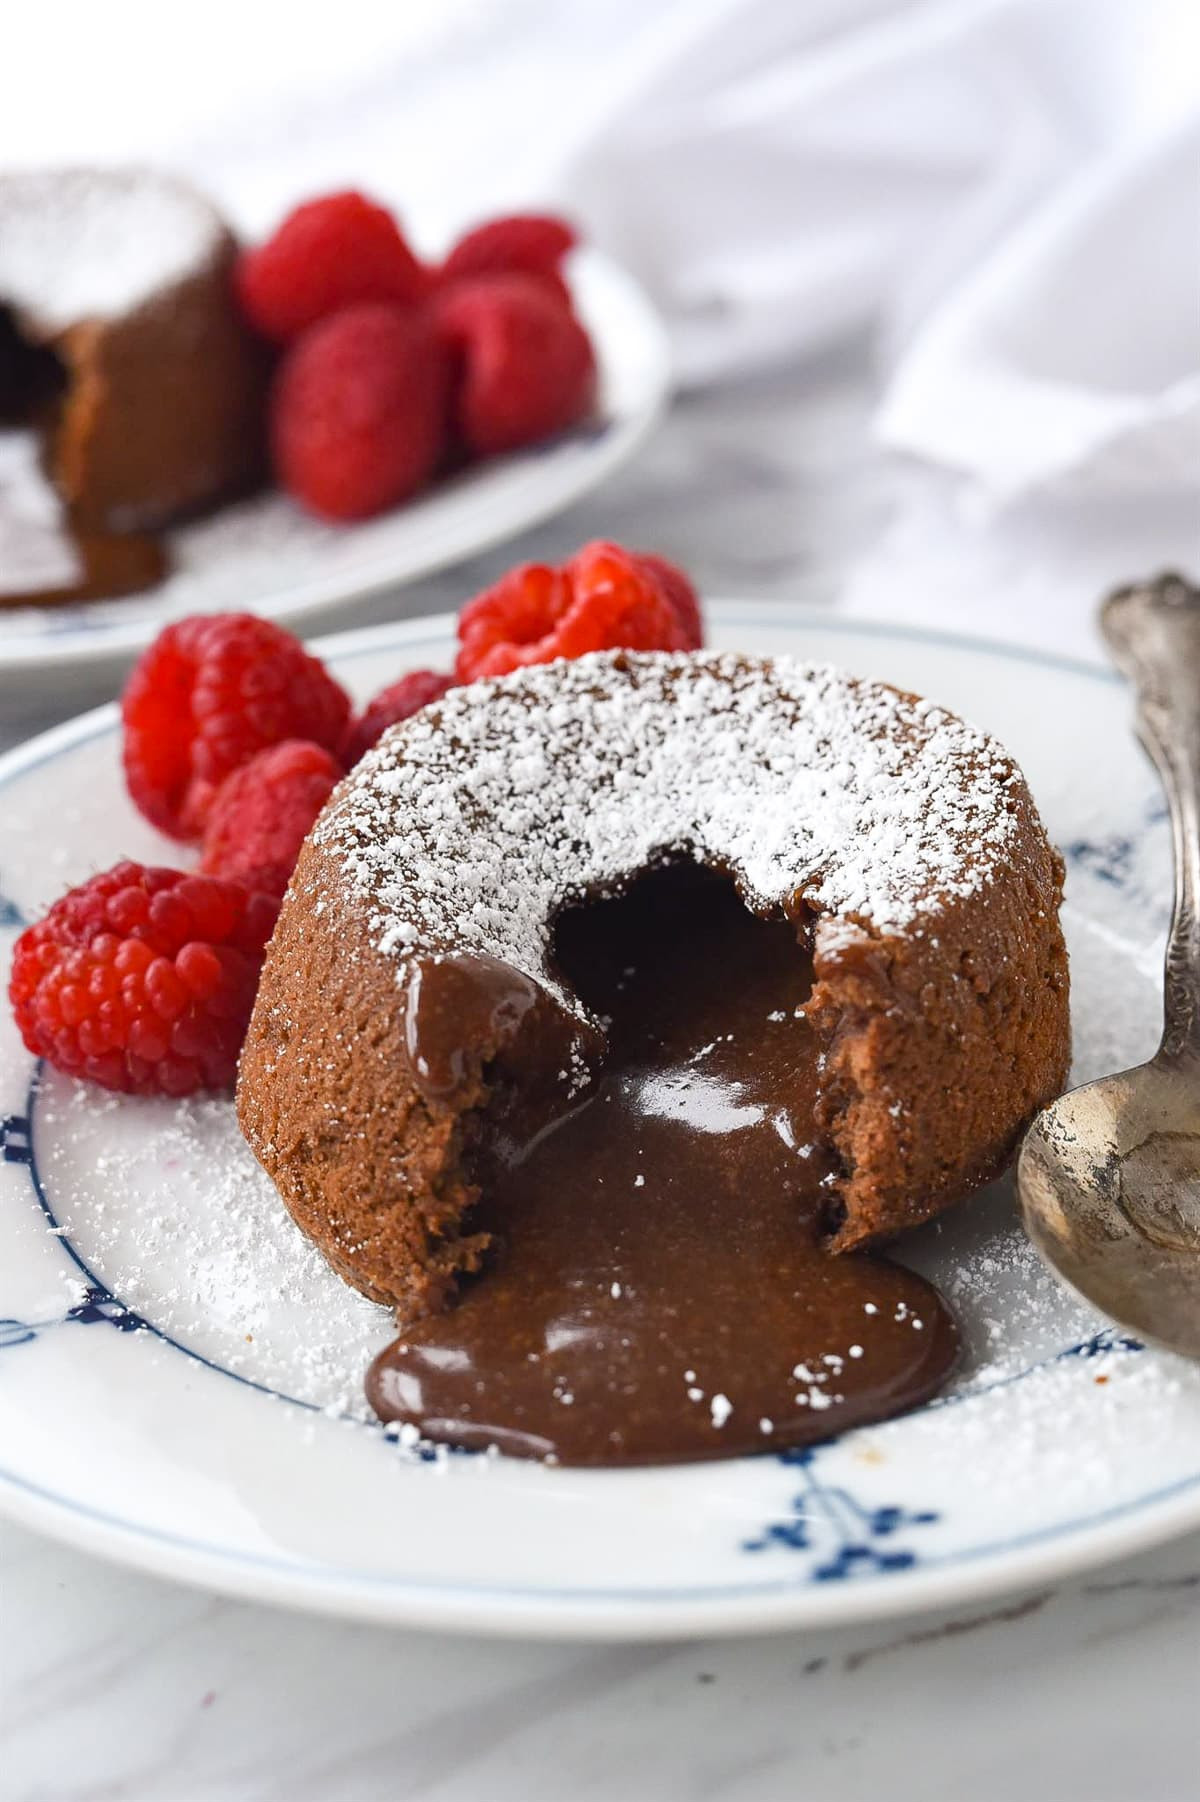 15 Recipes for Great Lava Chocolate Cake